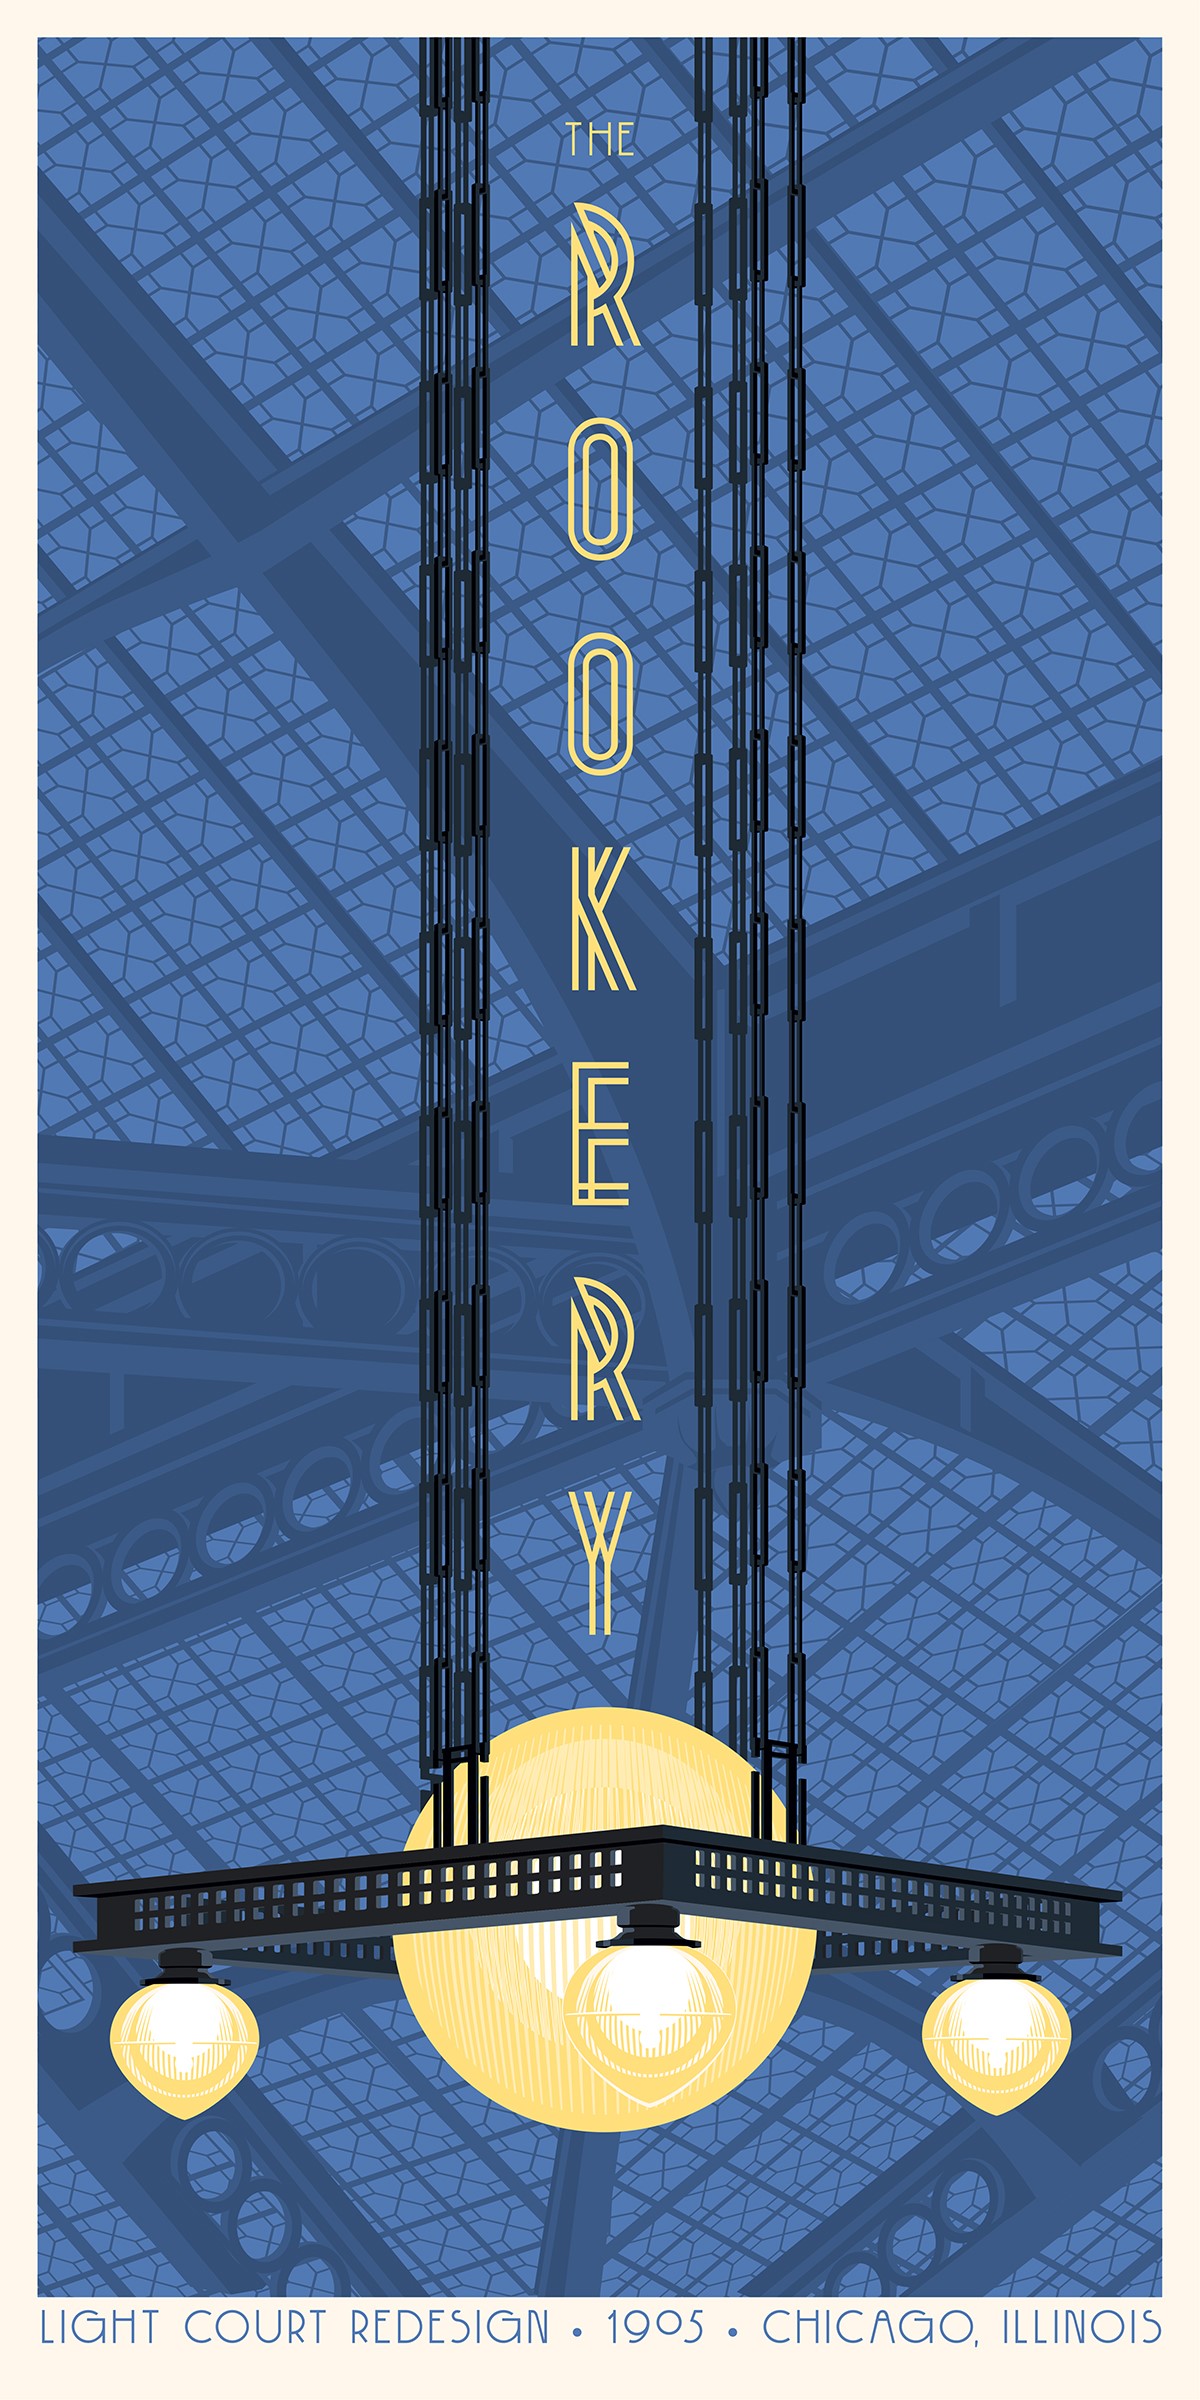 "The Rookery" by Steve Thomas